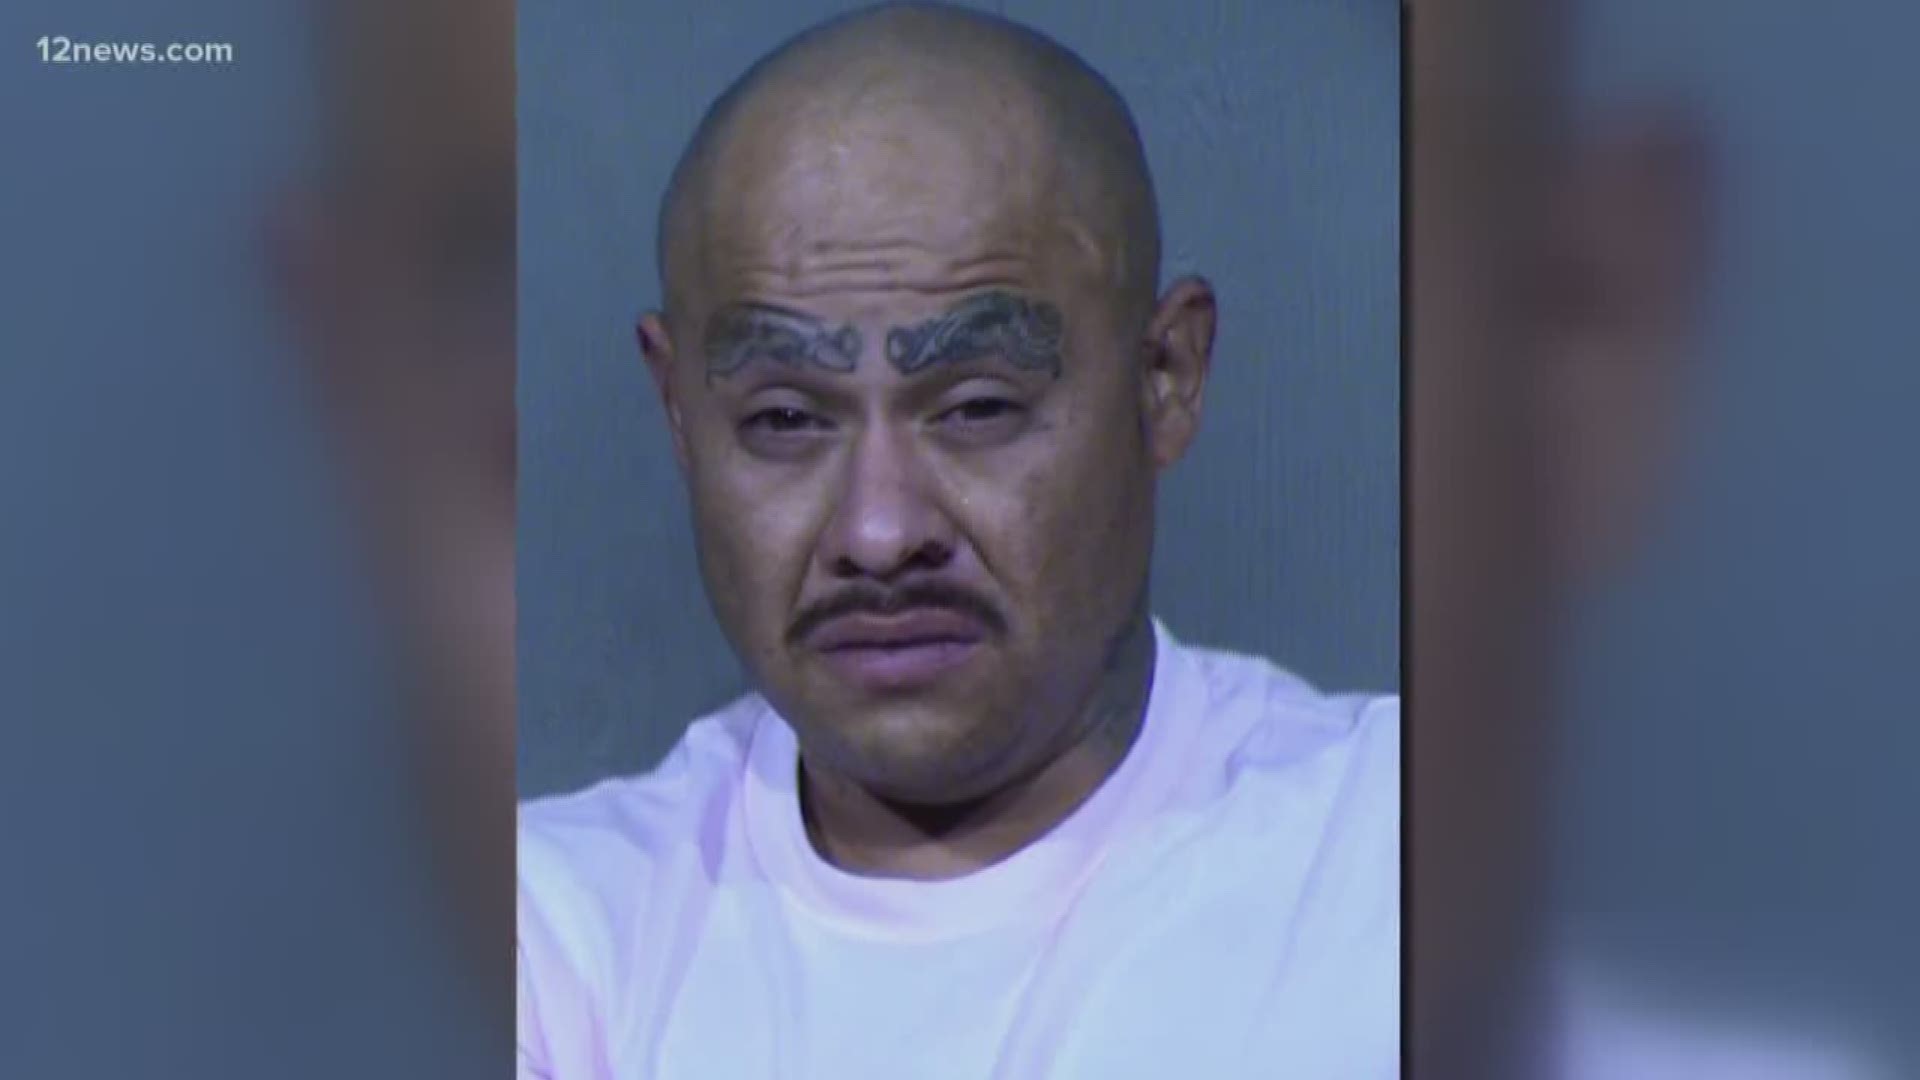 Rigoberto Jimenez faces several charges, including attempted murder in the second degree. 
This is not the 35-year-old's first run-in with the law.